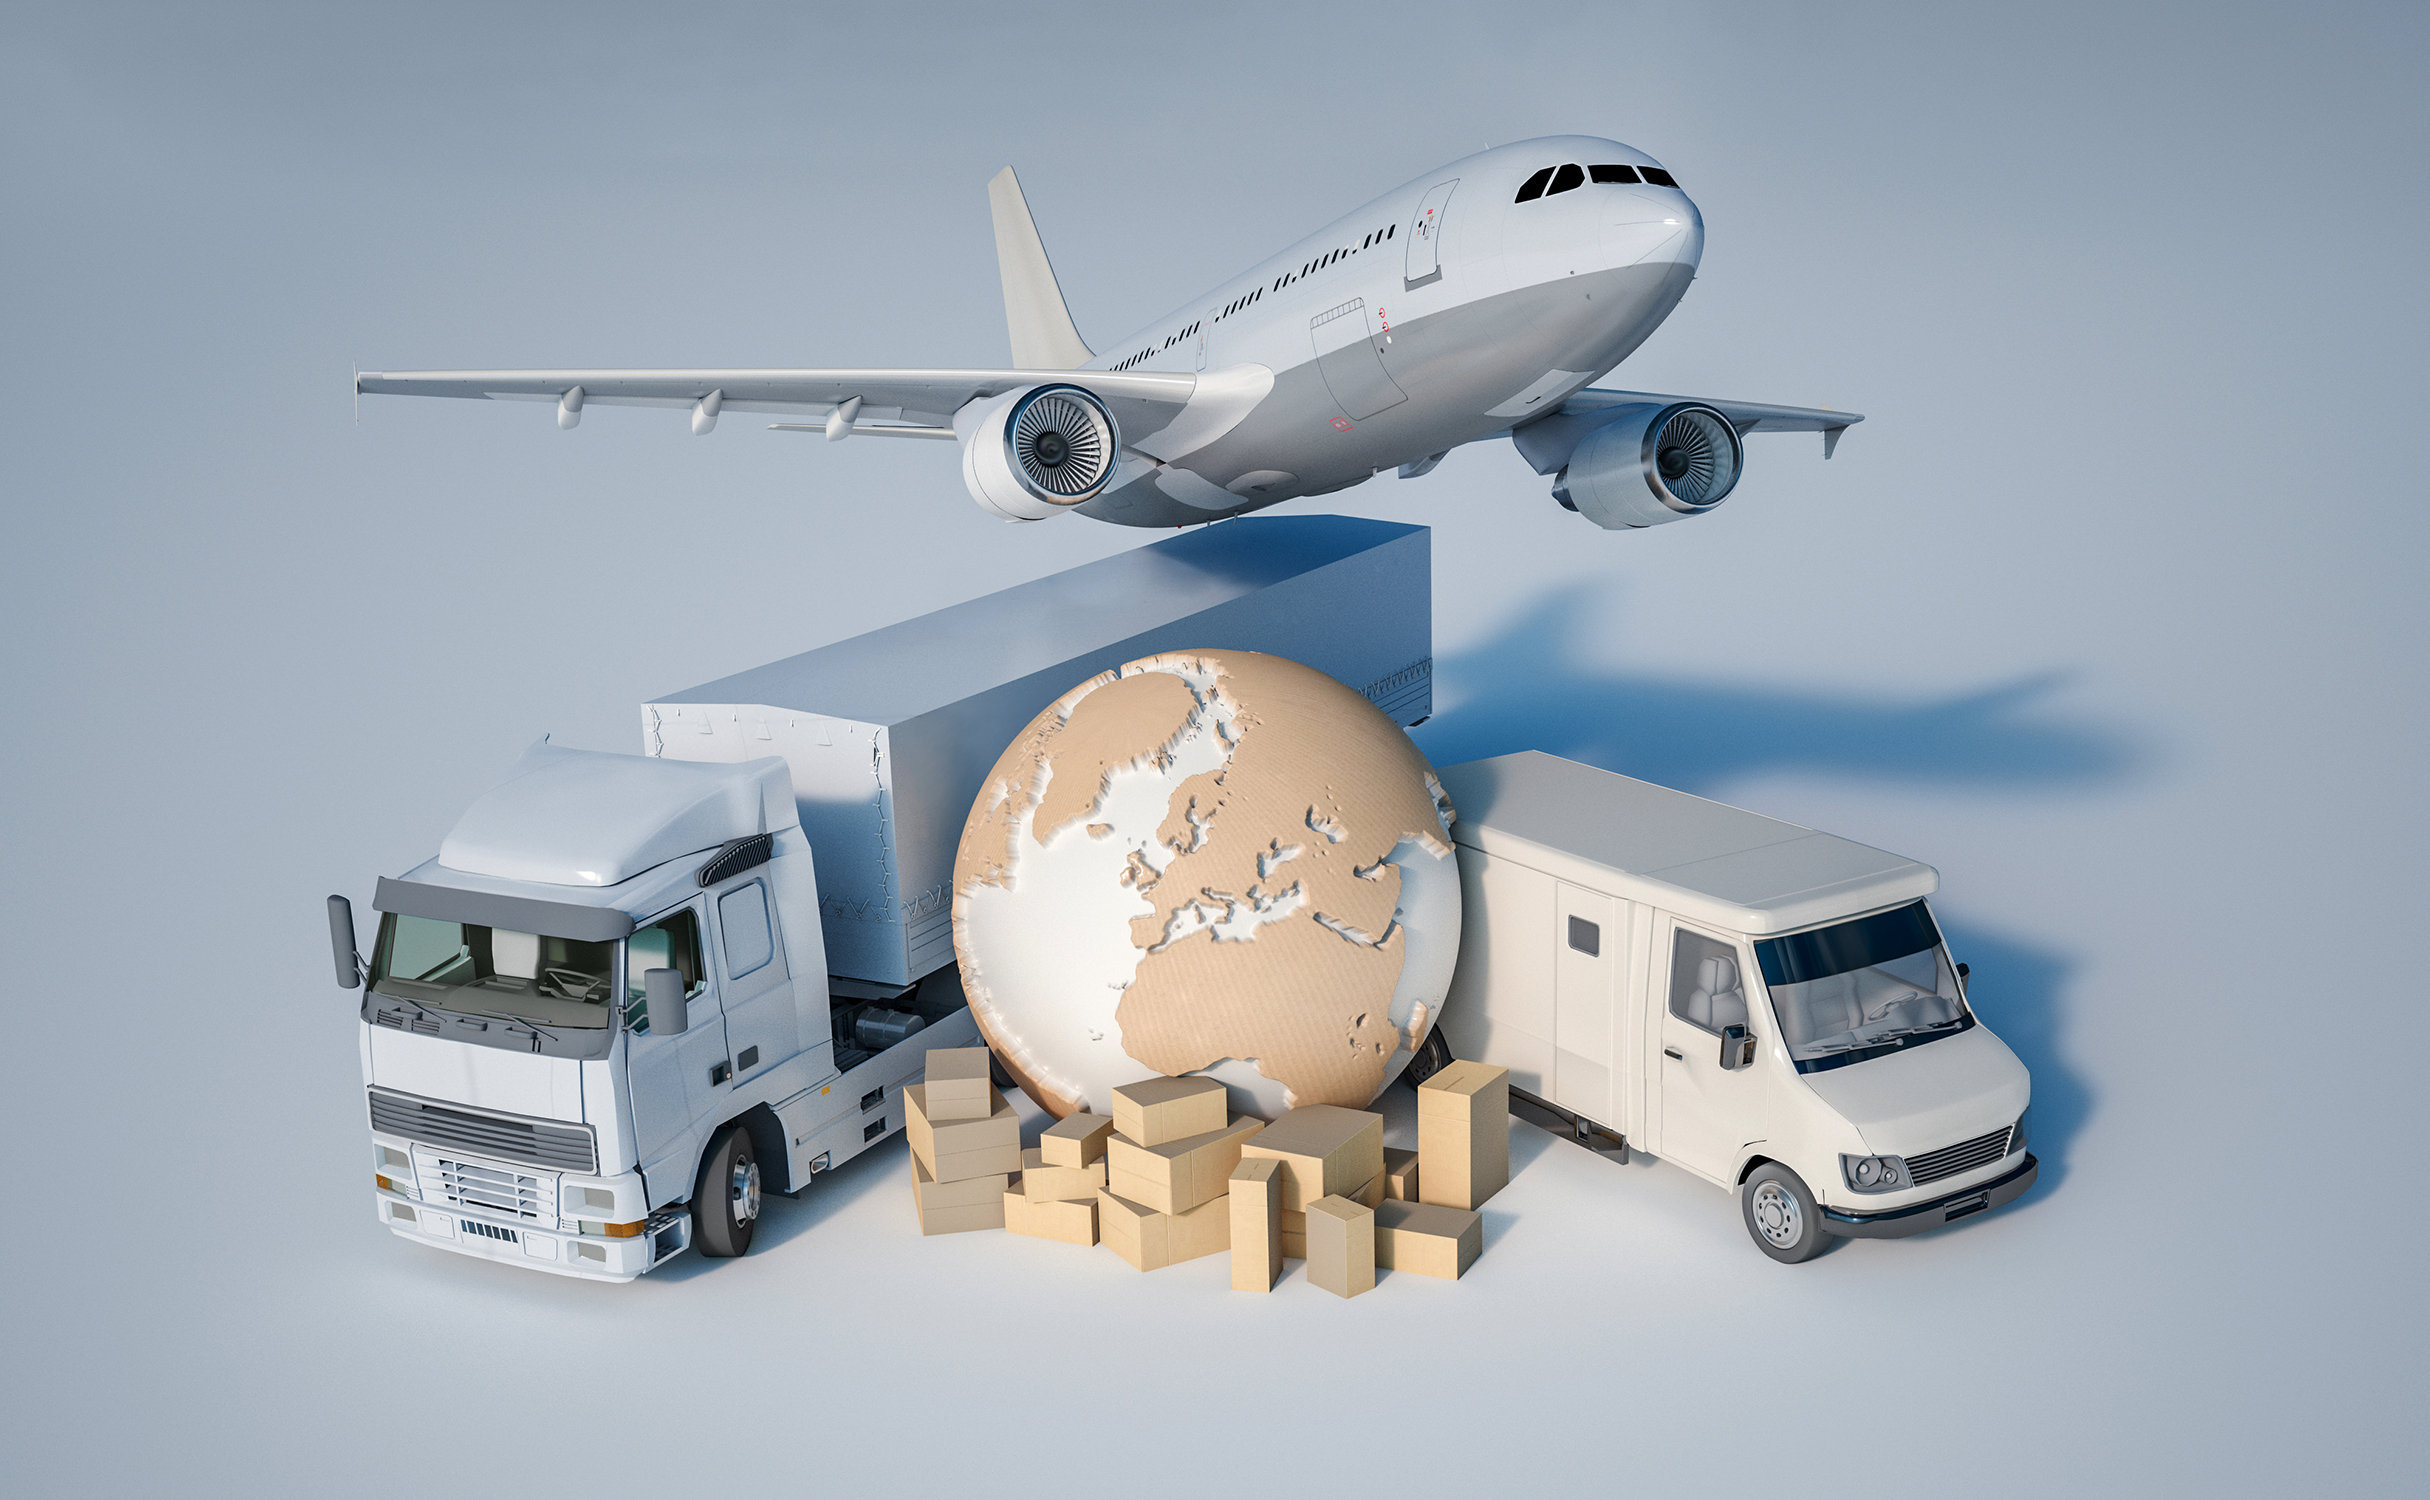 Photograph showing a globe, jet, two trucks and packages.